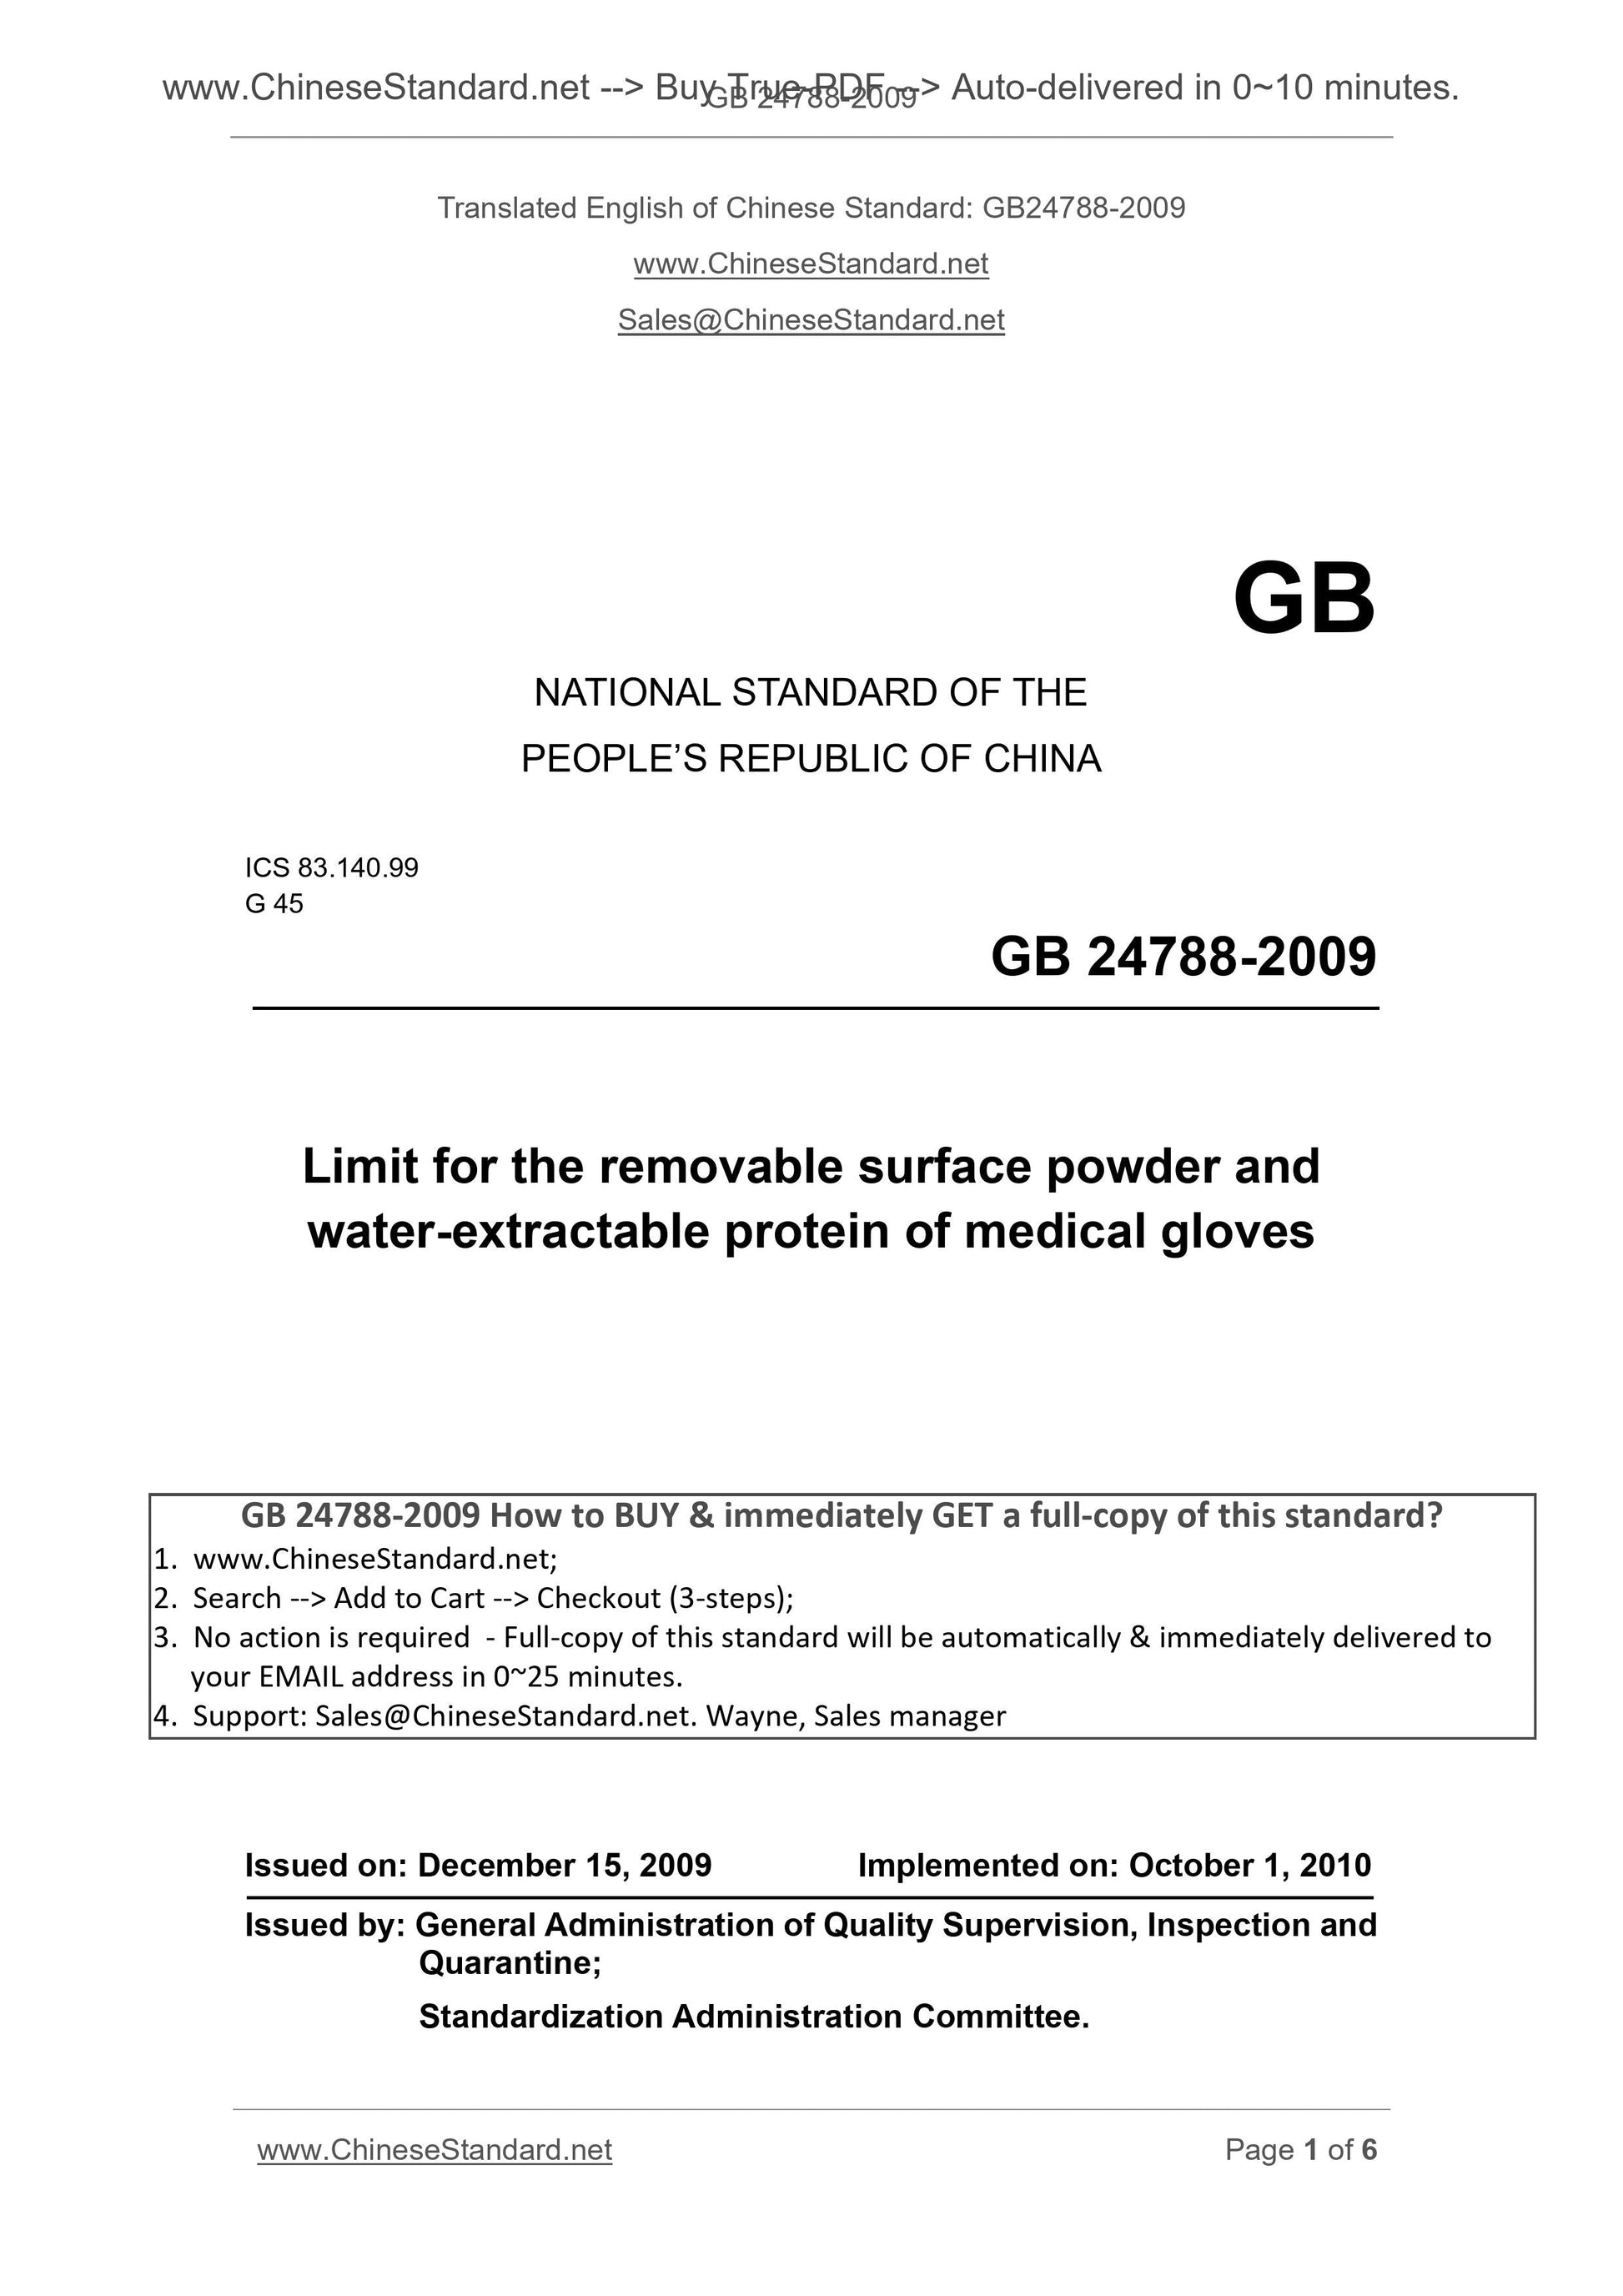 GB 24788-2009 Page 1